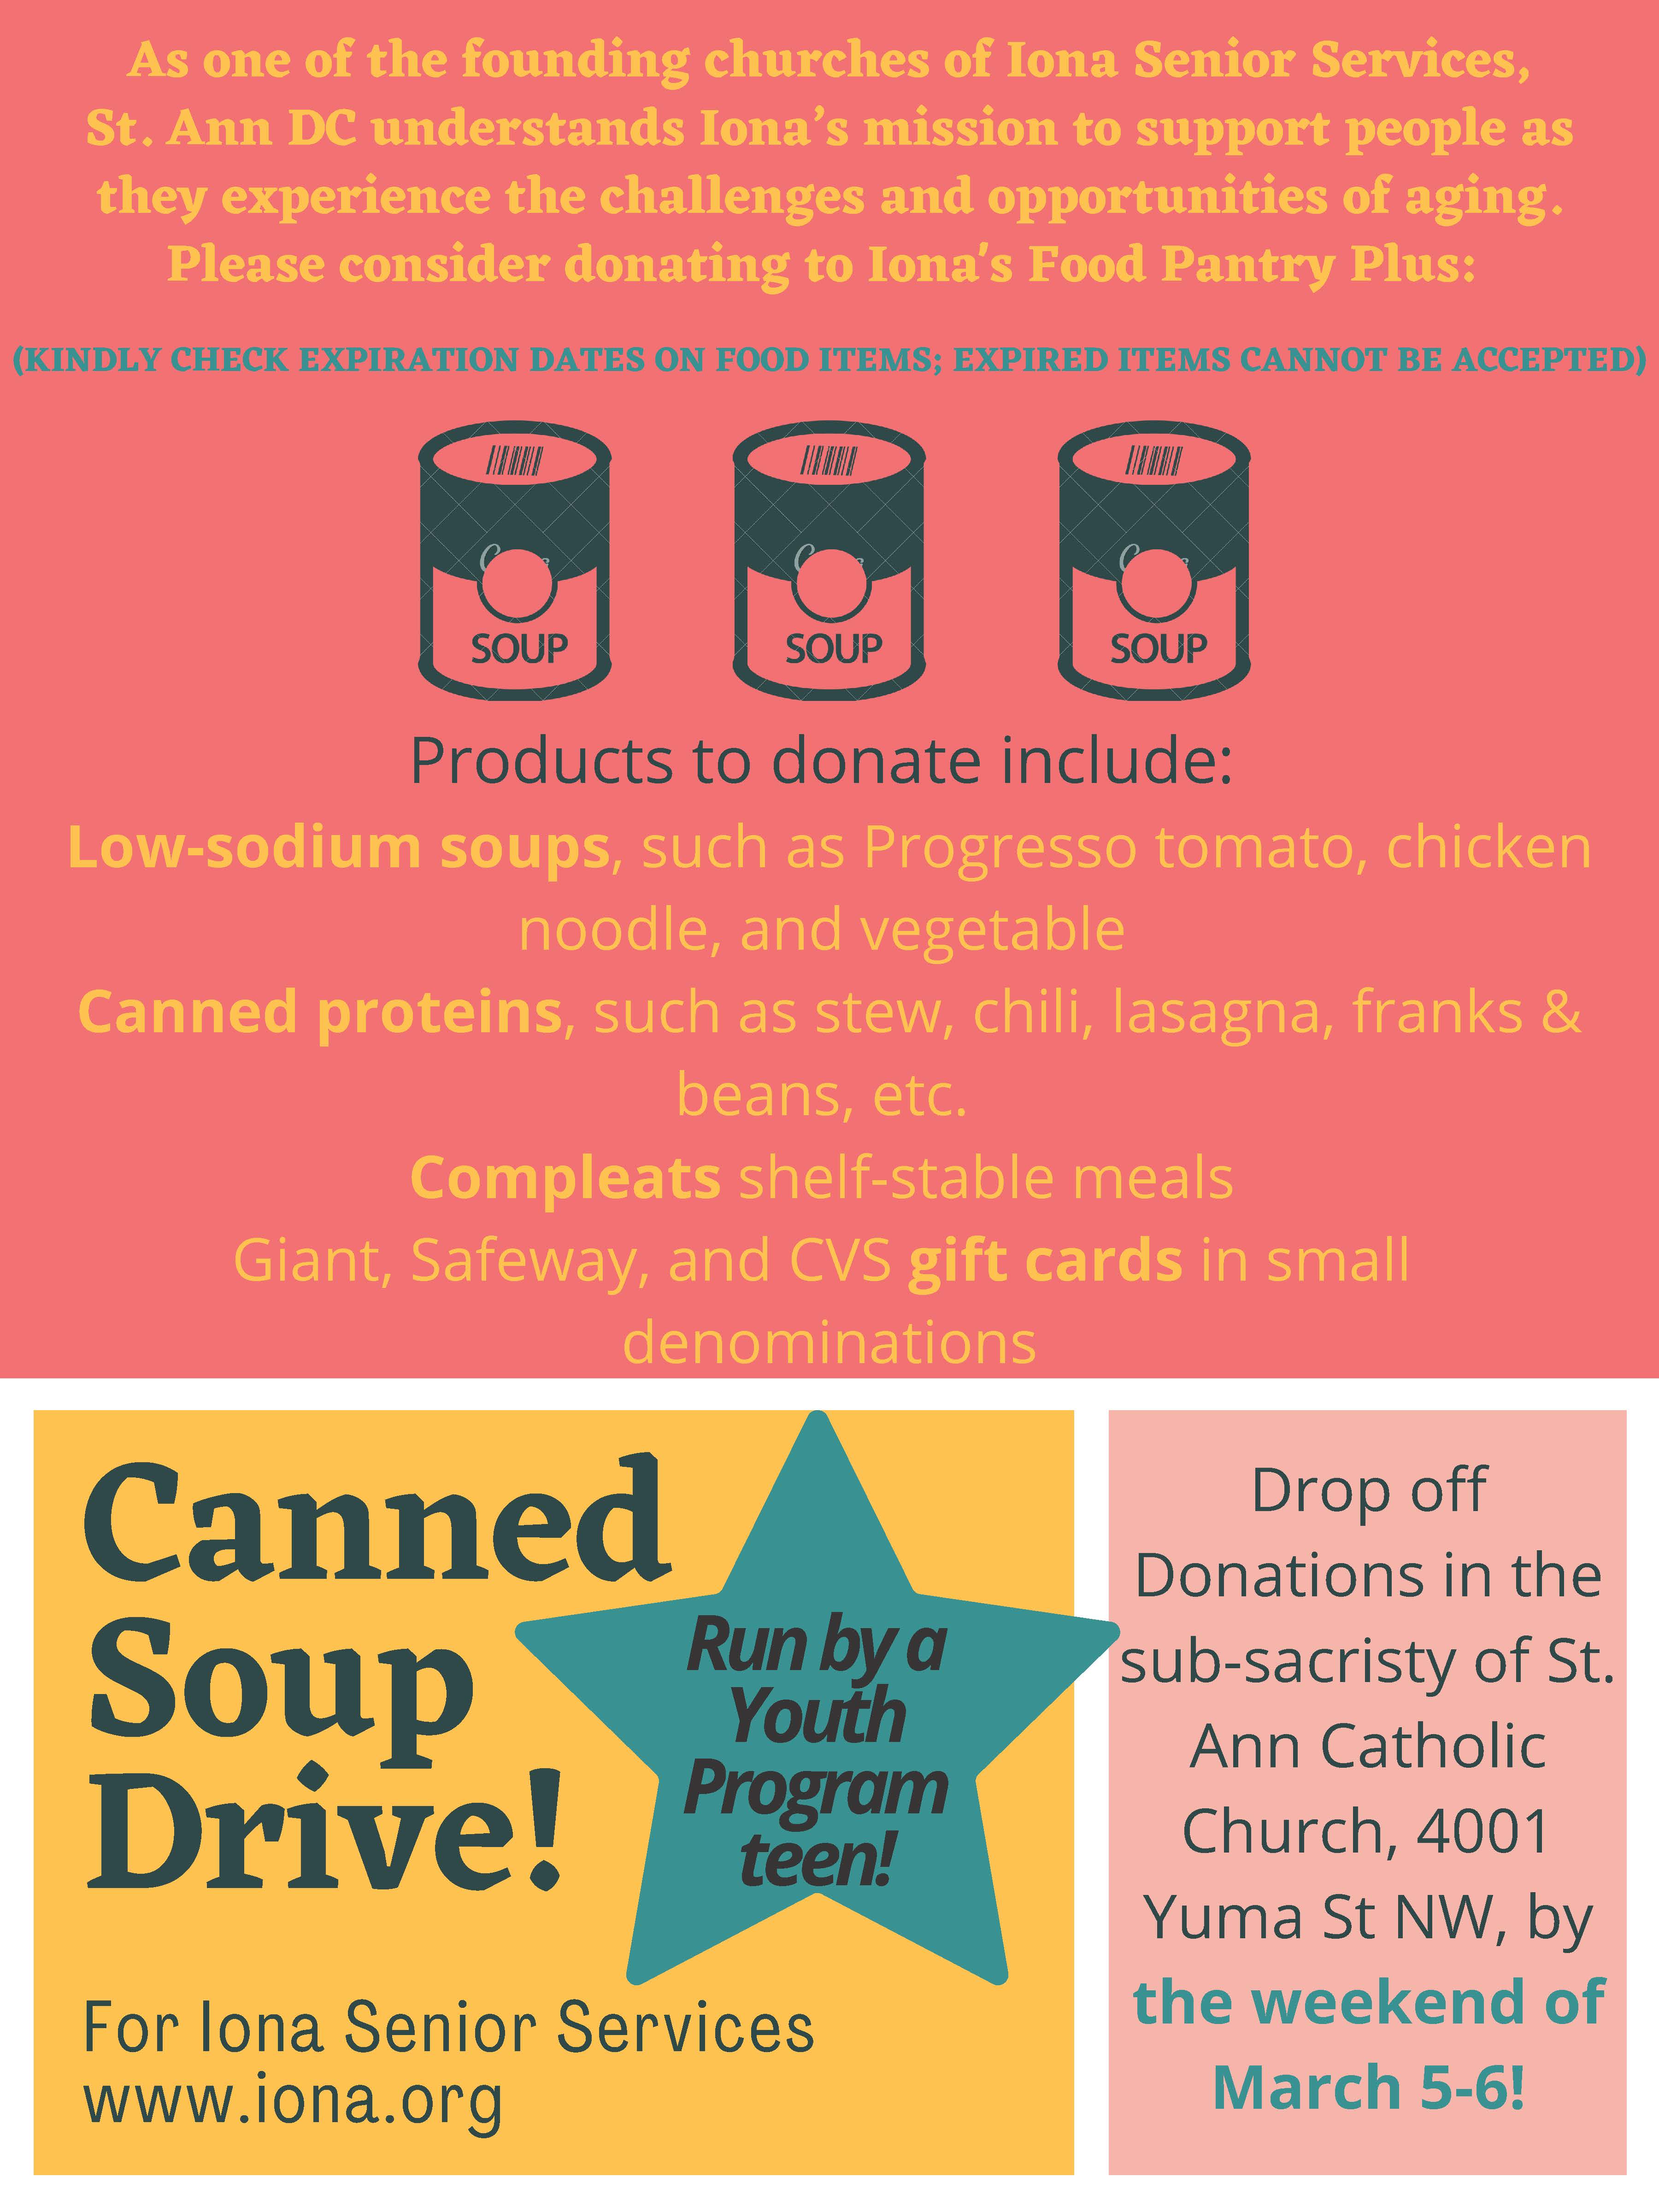 Canned Soup Drive Benefiting Iona Senior Services